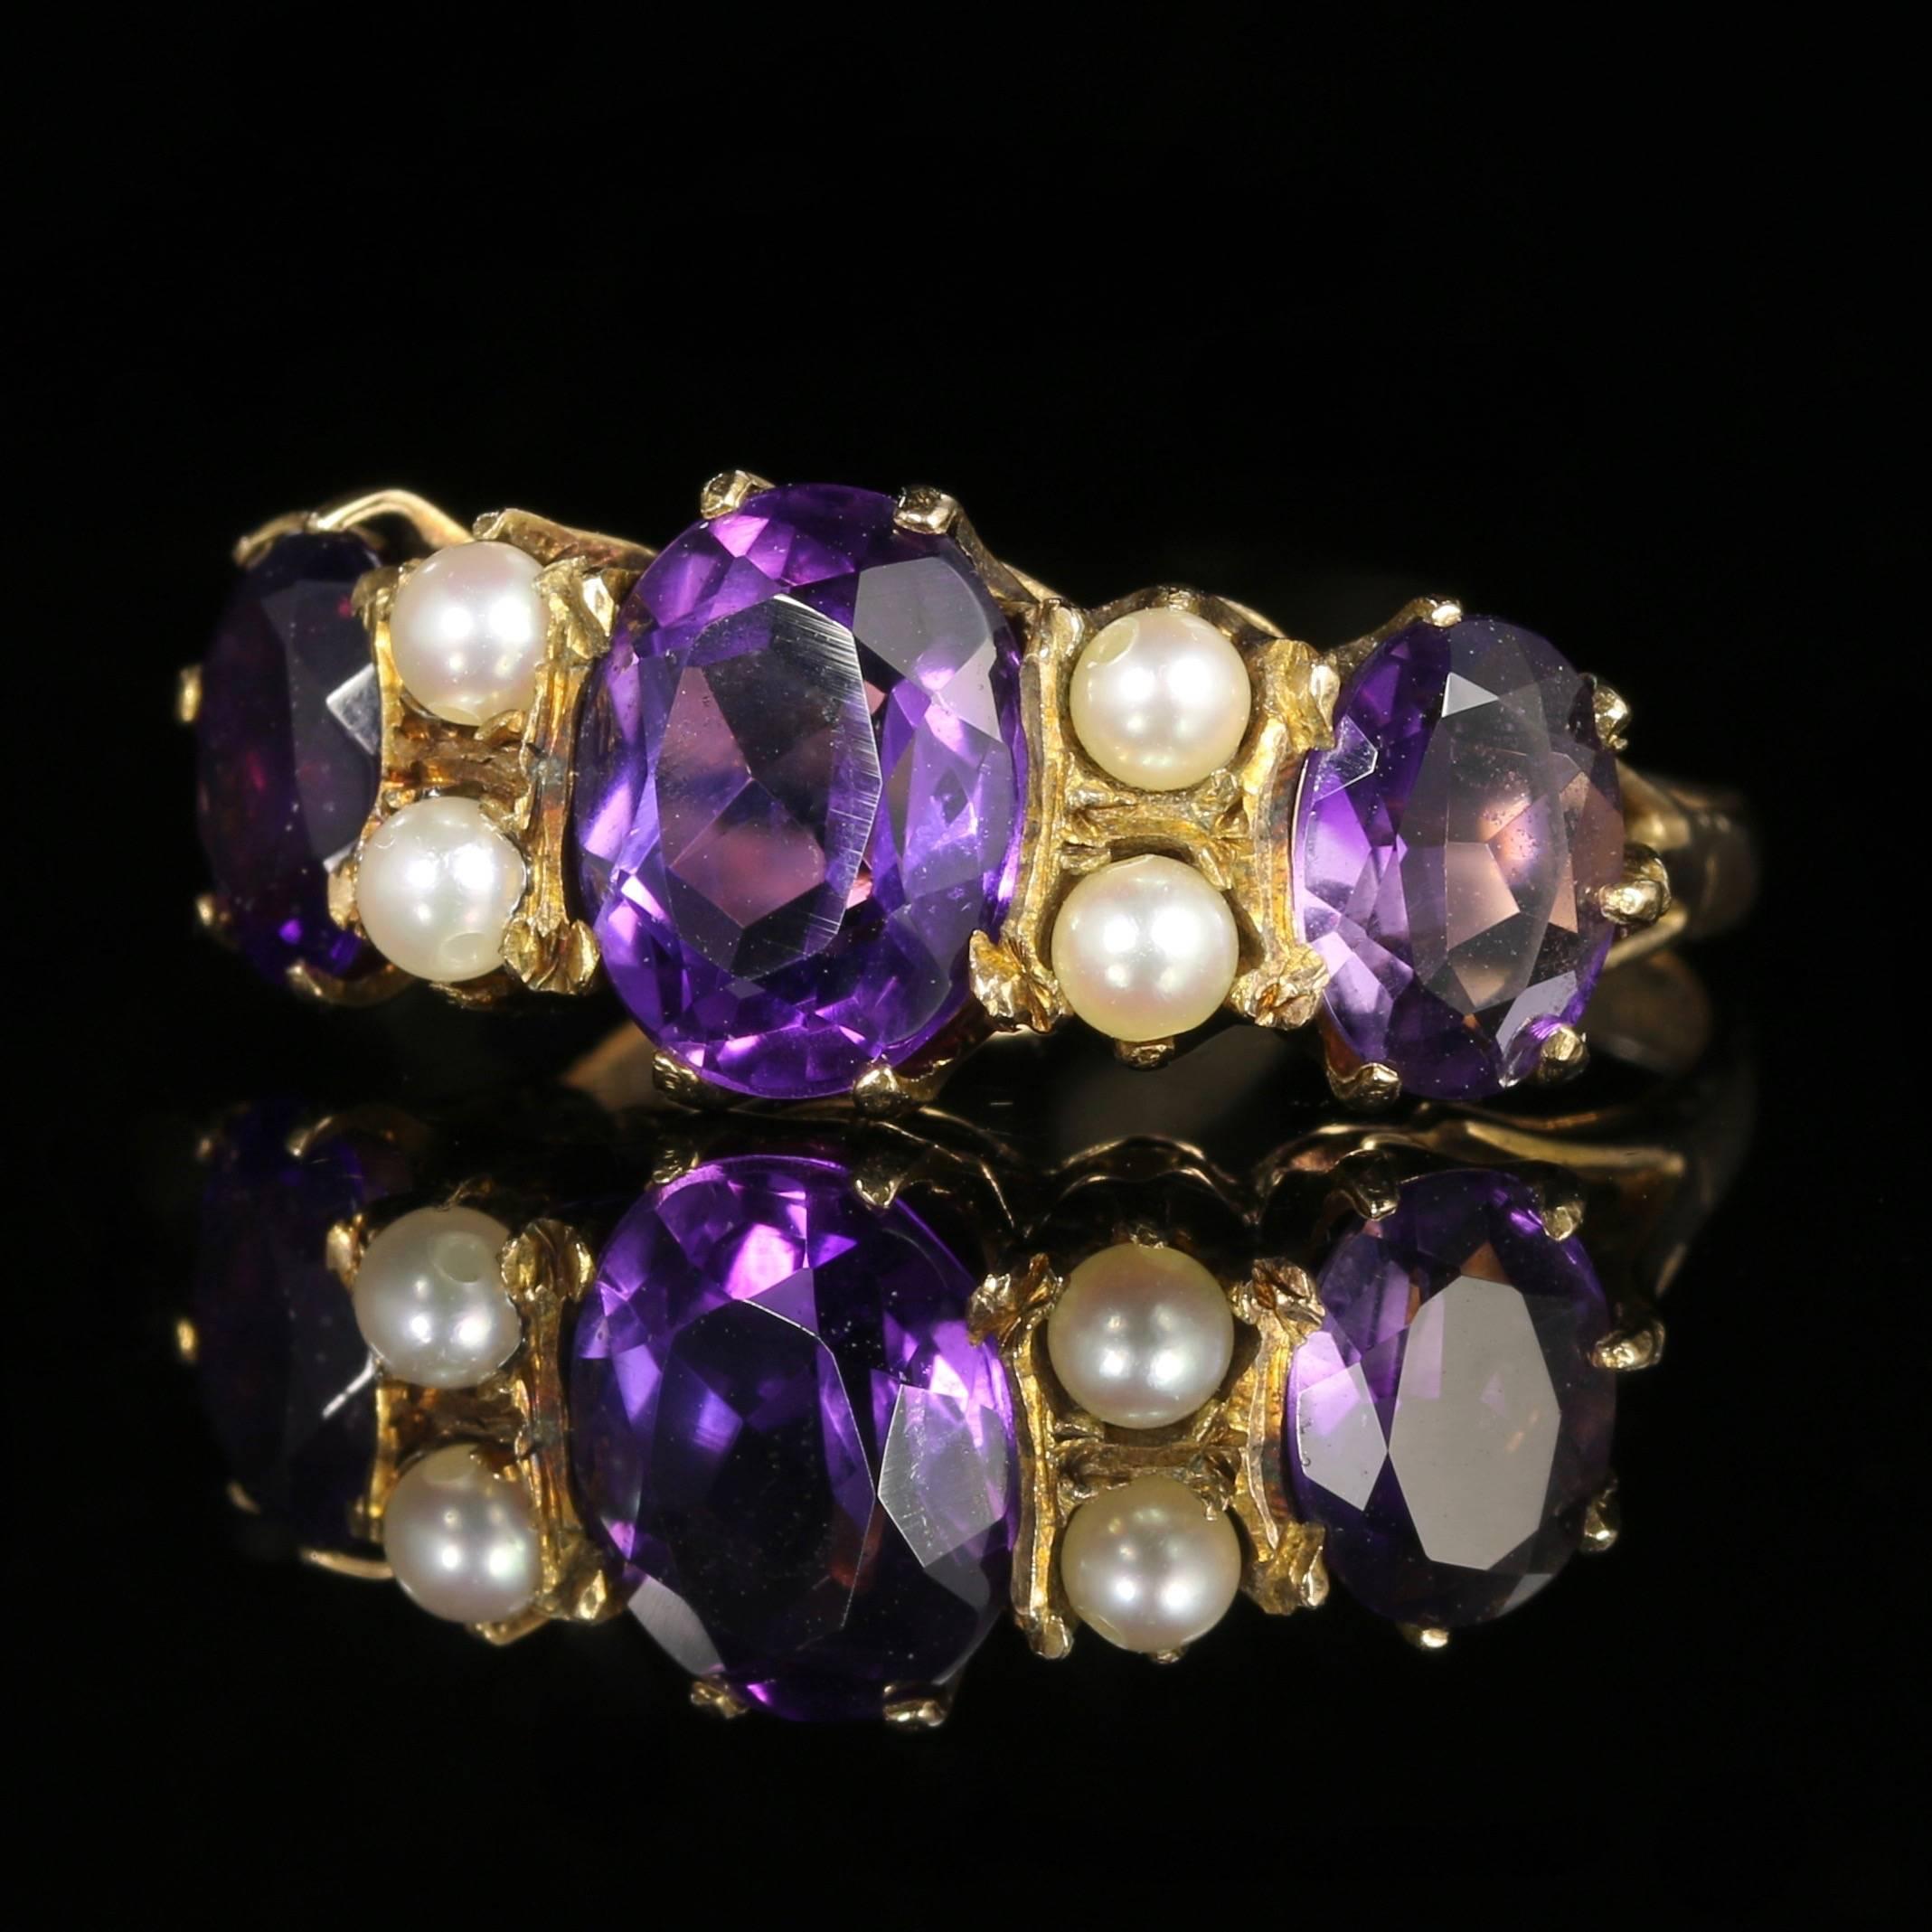 This fabulous 9ct Yellow Gold antique ring is set with beautiful rich purple Amethysts and lustrous Pearls.

Amethyst has been highly esteemed throughout the ages for its stunning beauty and legendary powers to stimulate, and soothe, the mind and